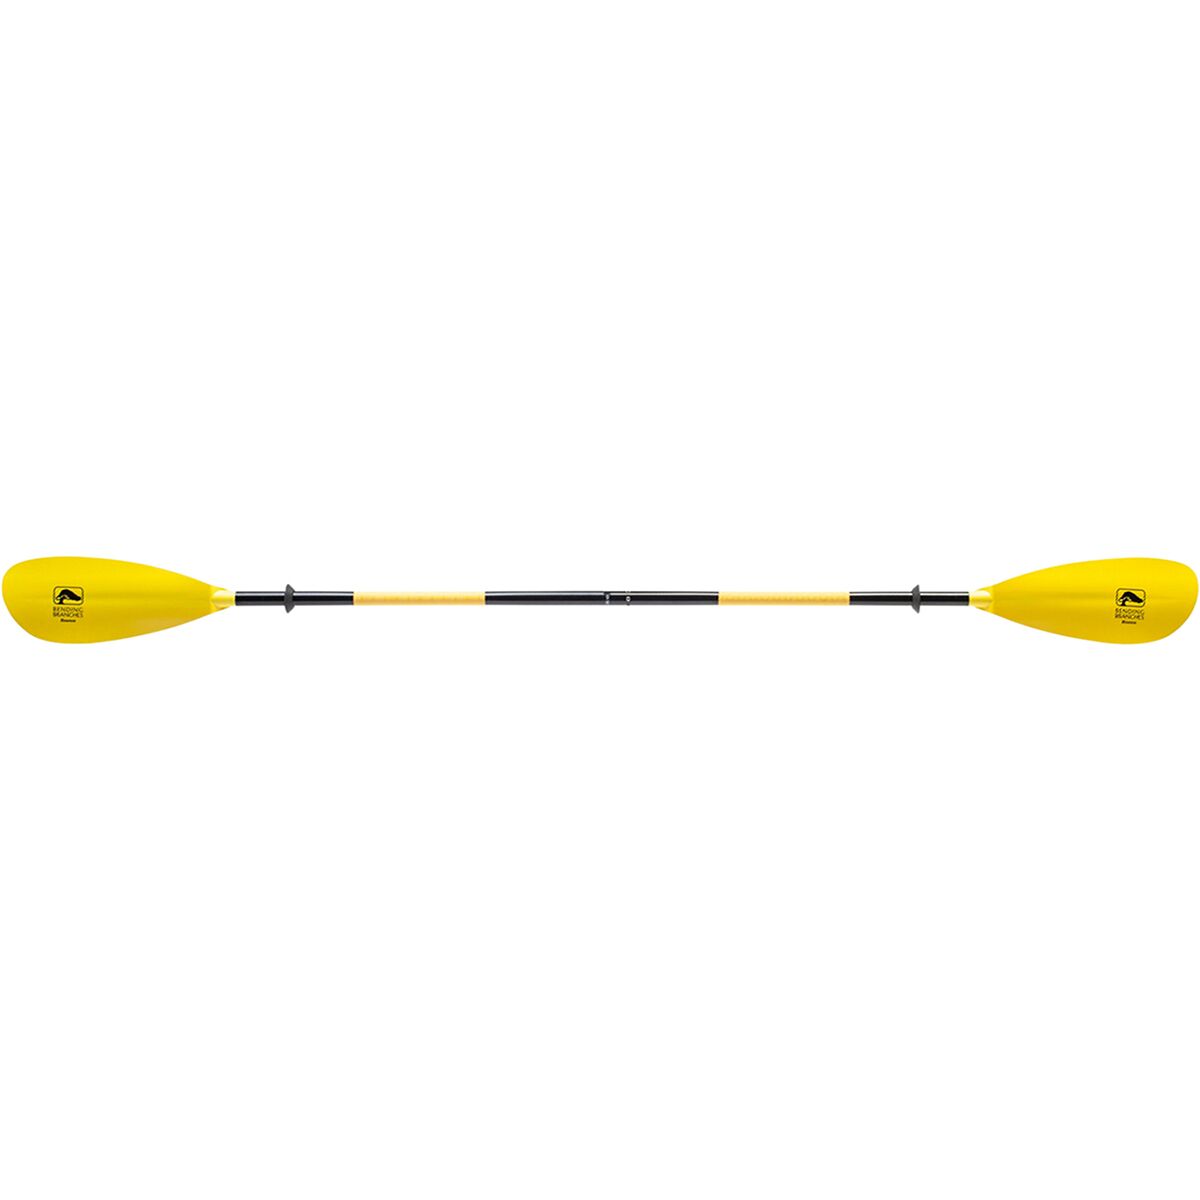 Bending Branches Bounce Paddle - Straight Shaft